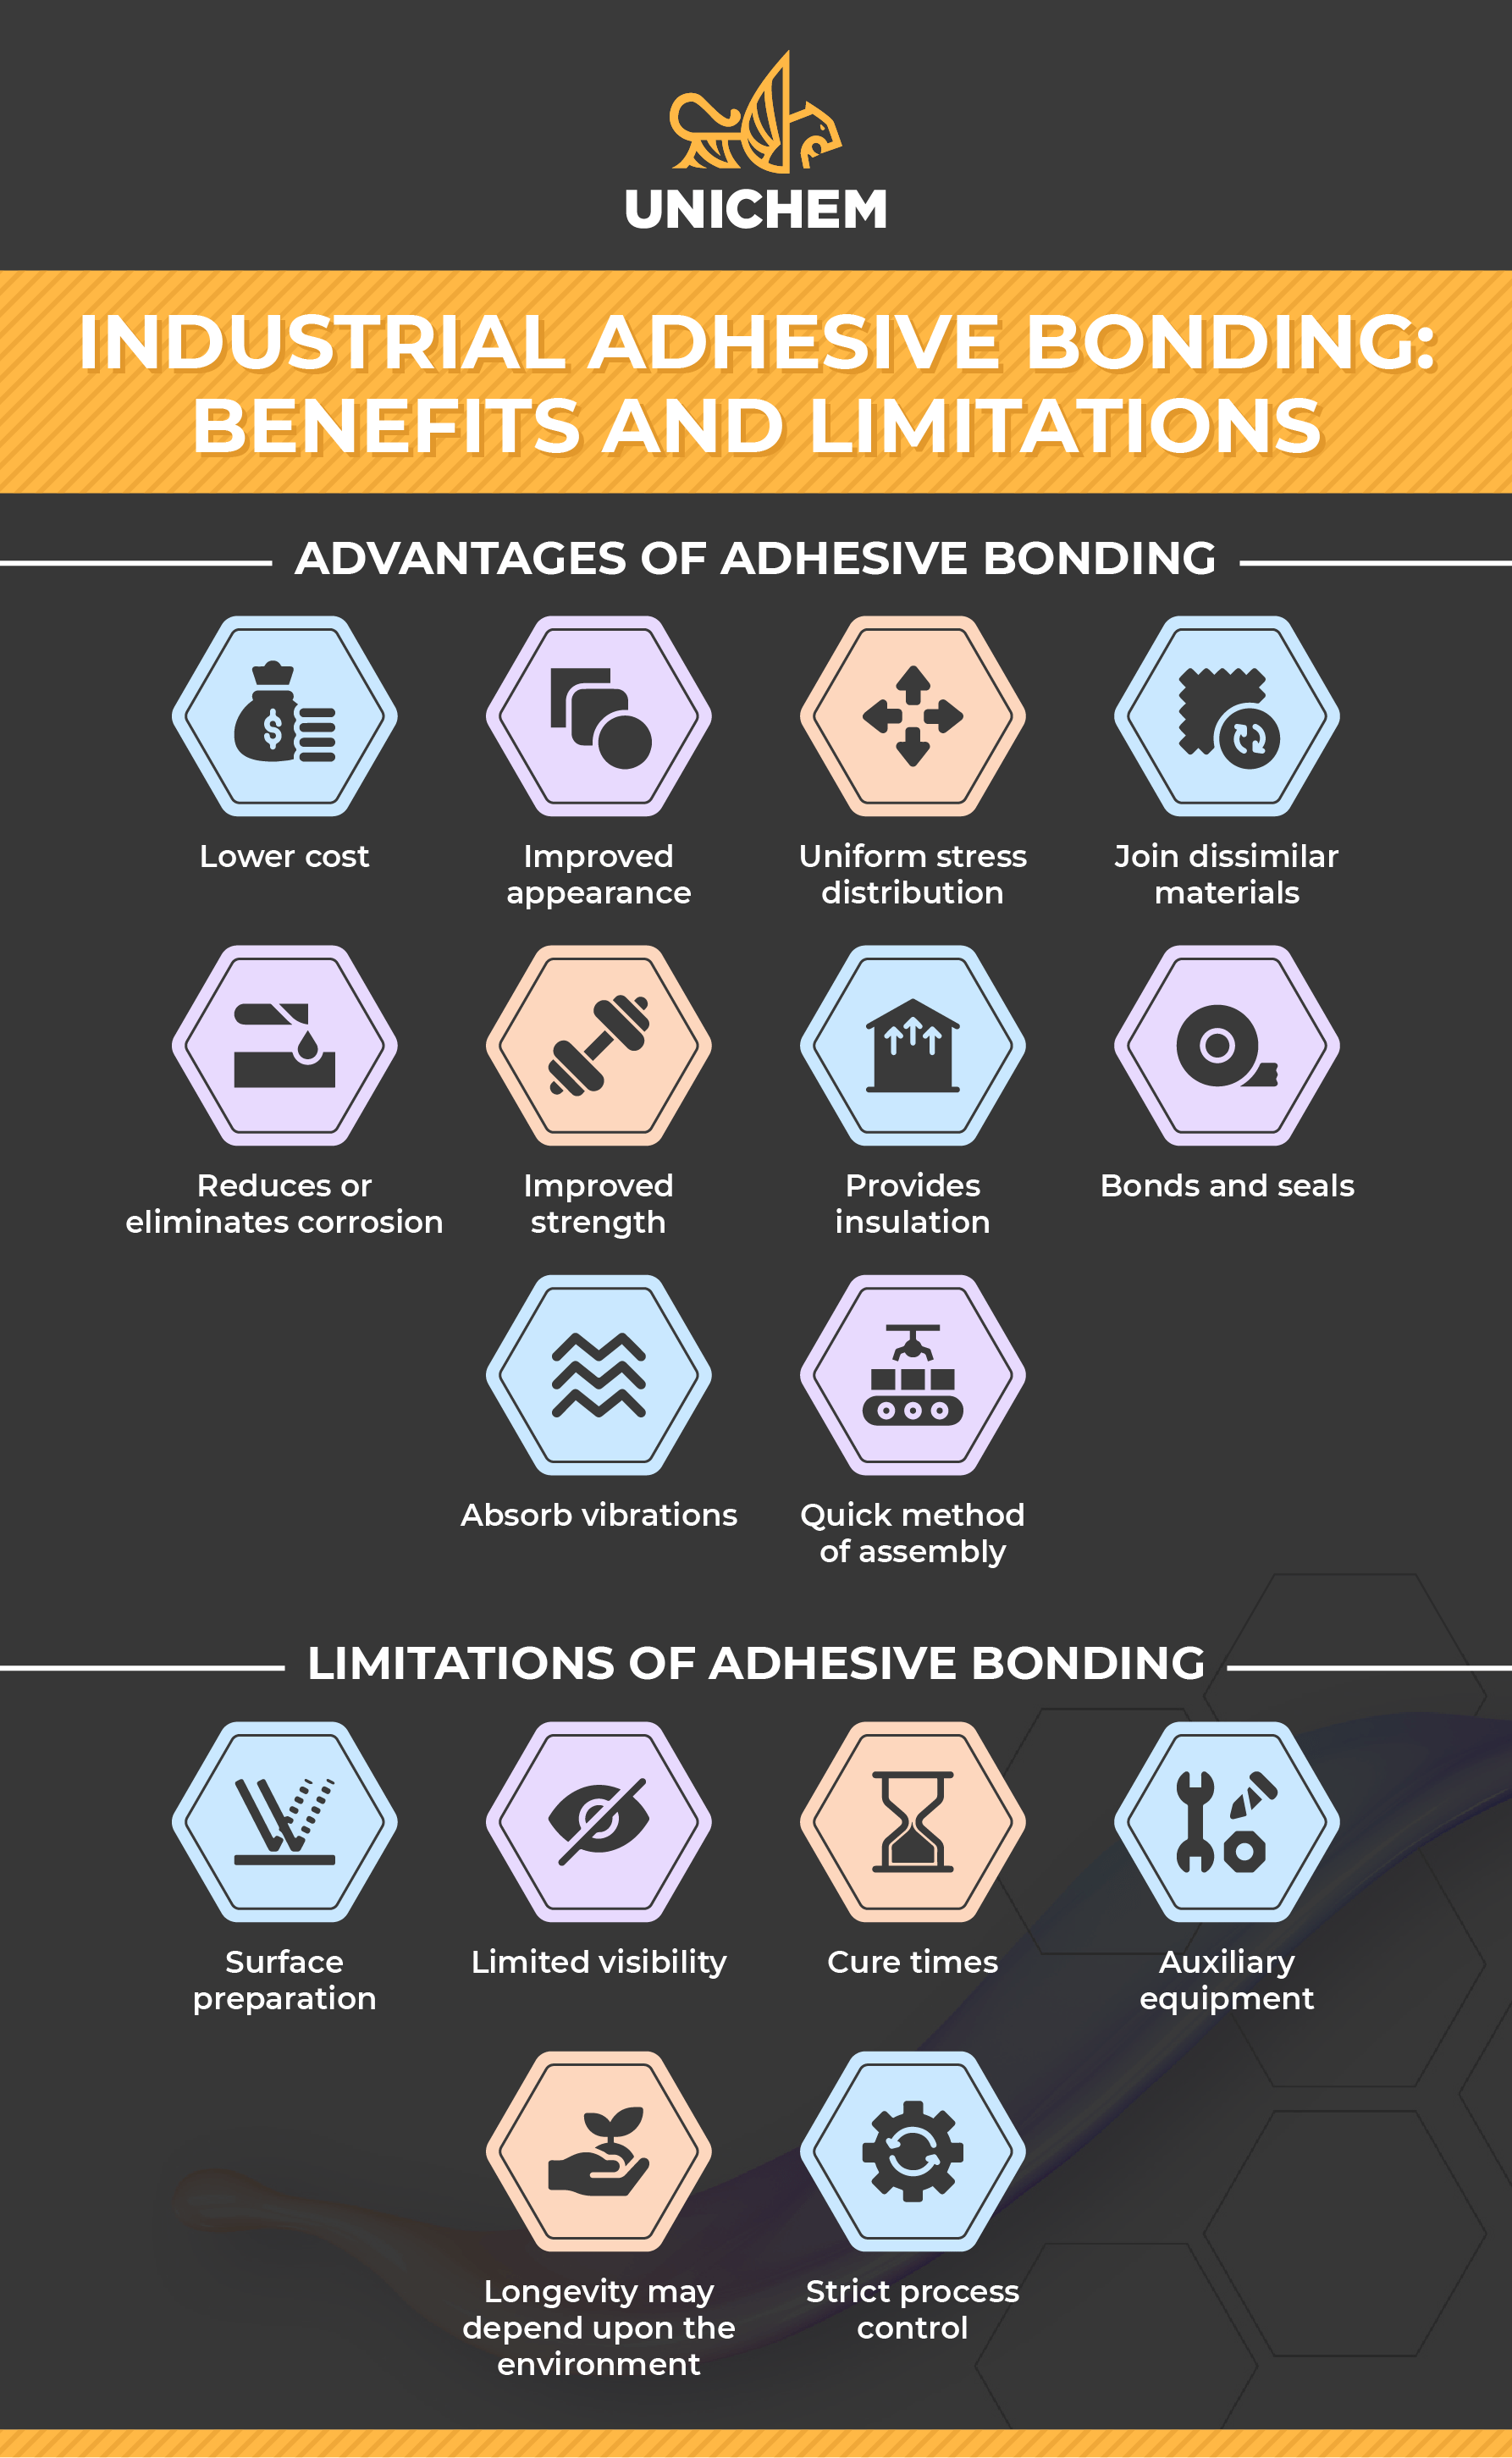 industrial adhesive bonding benefits and limitations infographic